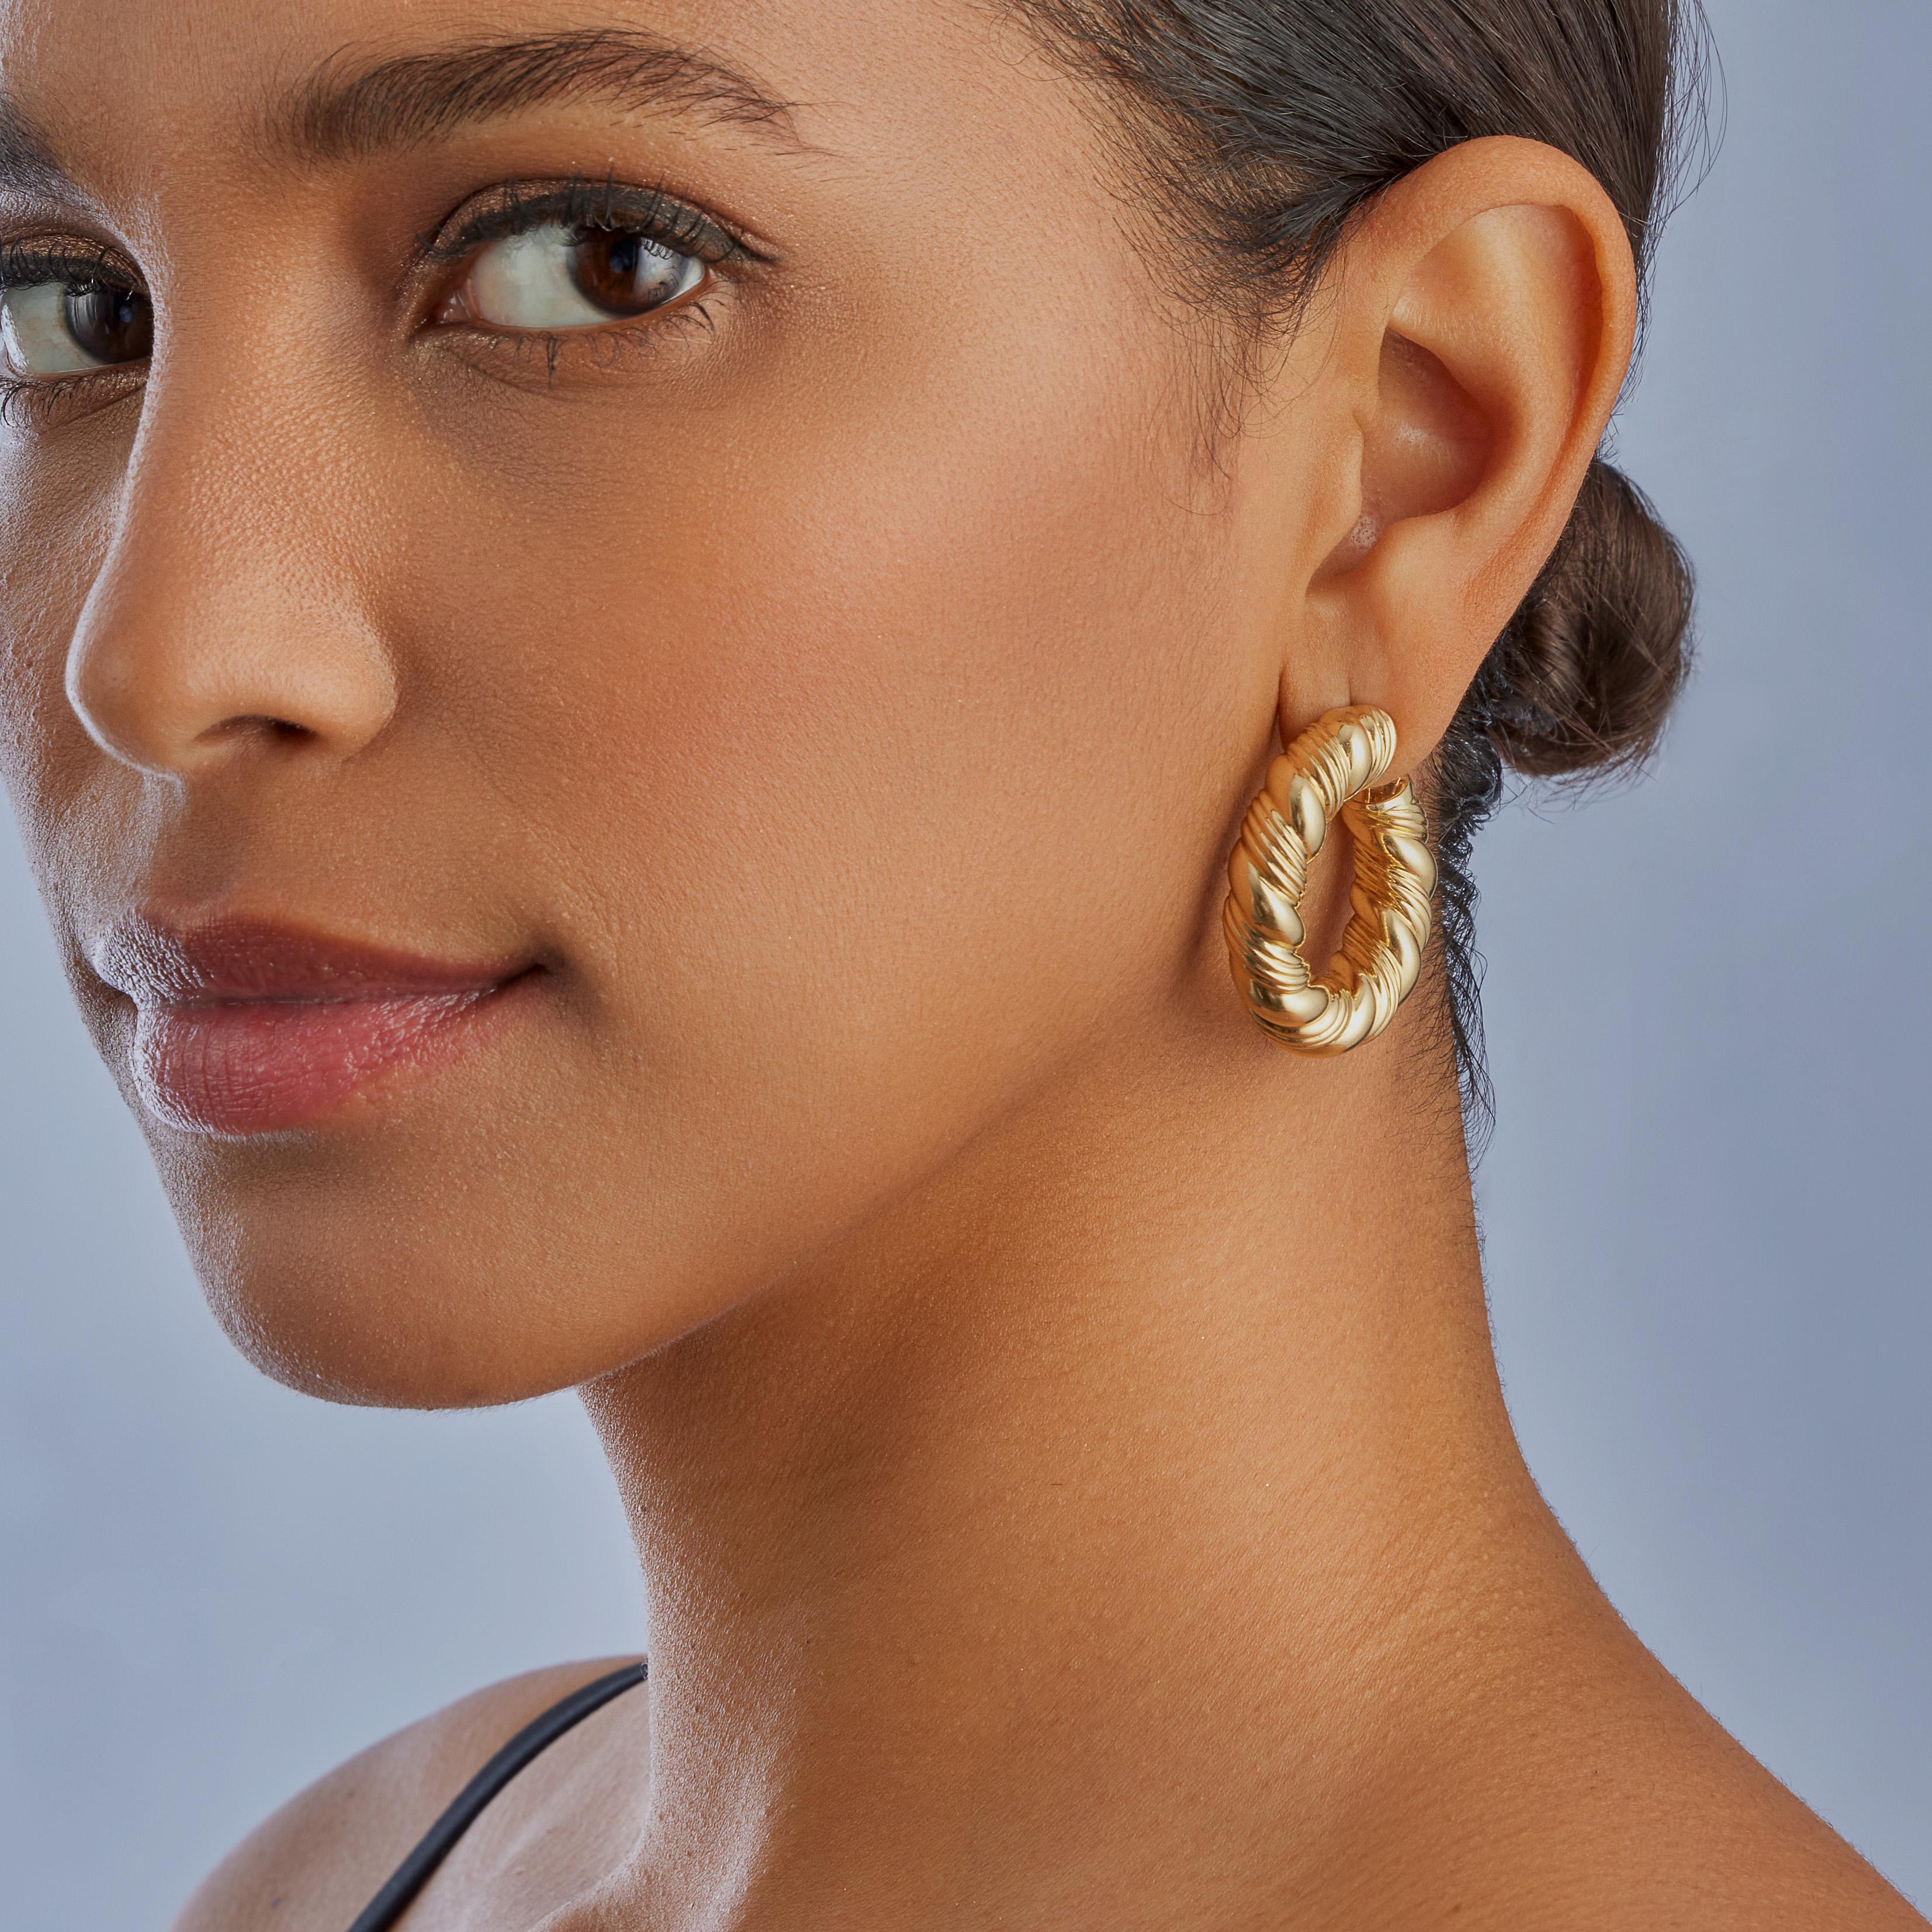 These Van Cleef & Arpels Paris hoop clip earrings in 18K gold date from the 1980s. Each is designed as a ropetwist pattern, ribbed hoop. Designed to hang so that the hoop faces forward, showcasing the circular form and dynamic patterning, these chic